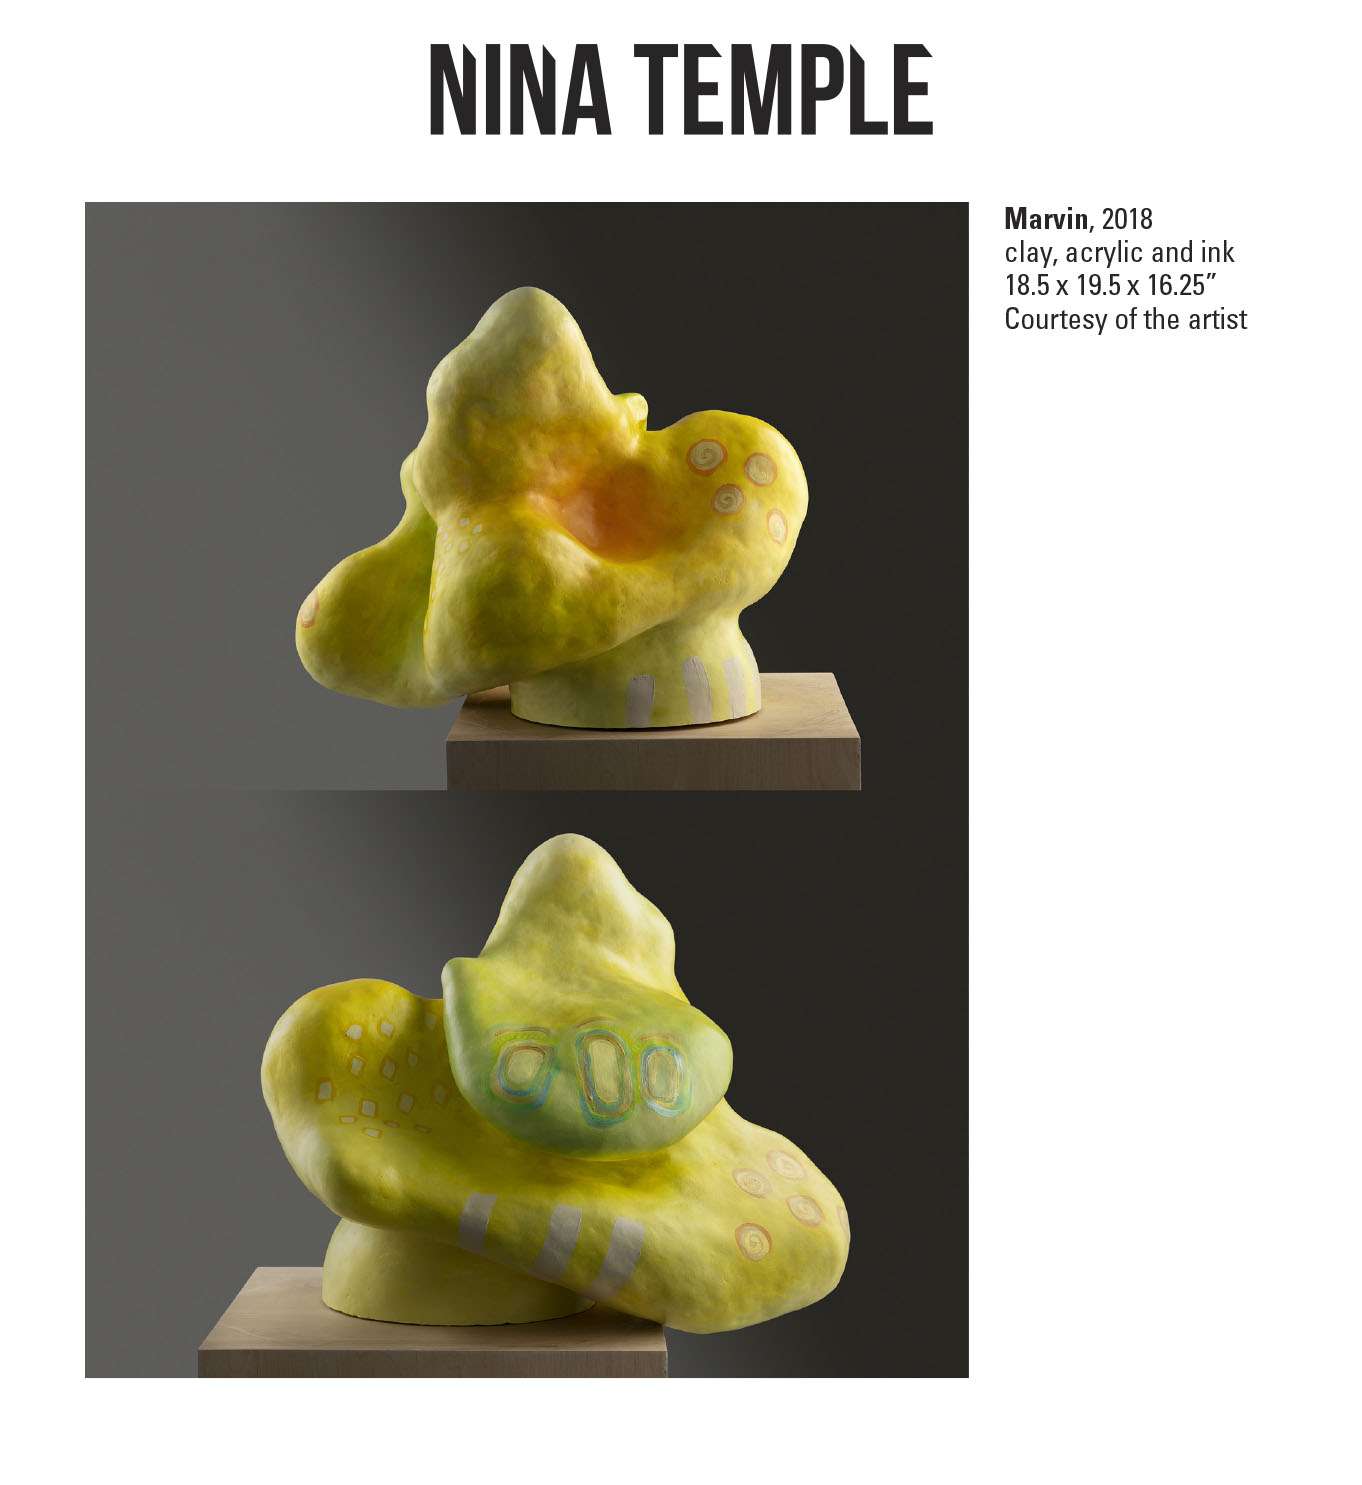 Nina Temple, Marvin, 2018. Clay, acrylic and ink. 18.5 x 19.5 x 16.25” Courtesy of the artist. A yellow clay sculpture of a biomorphic shape with colored details throughout the surface area.